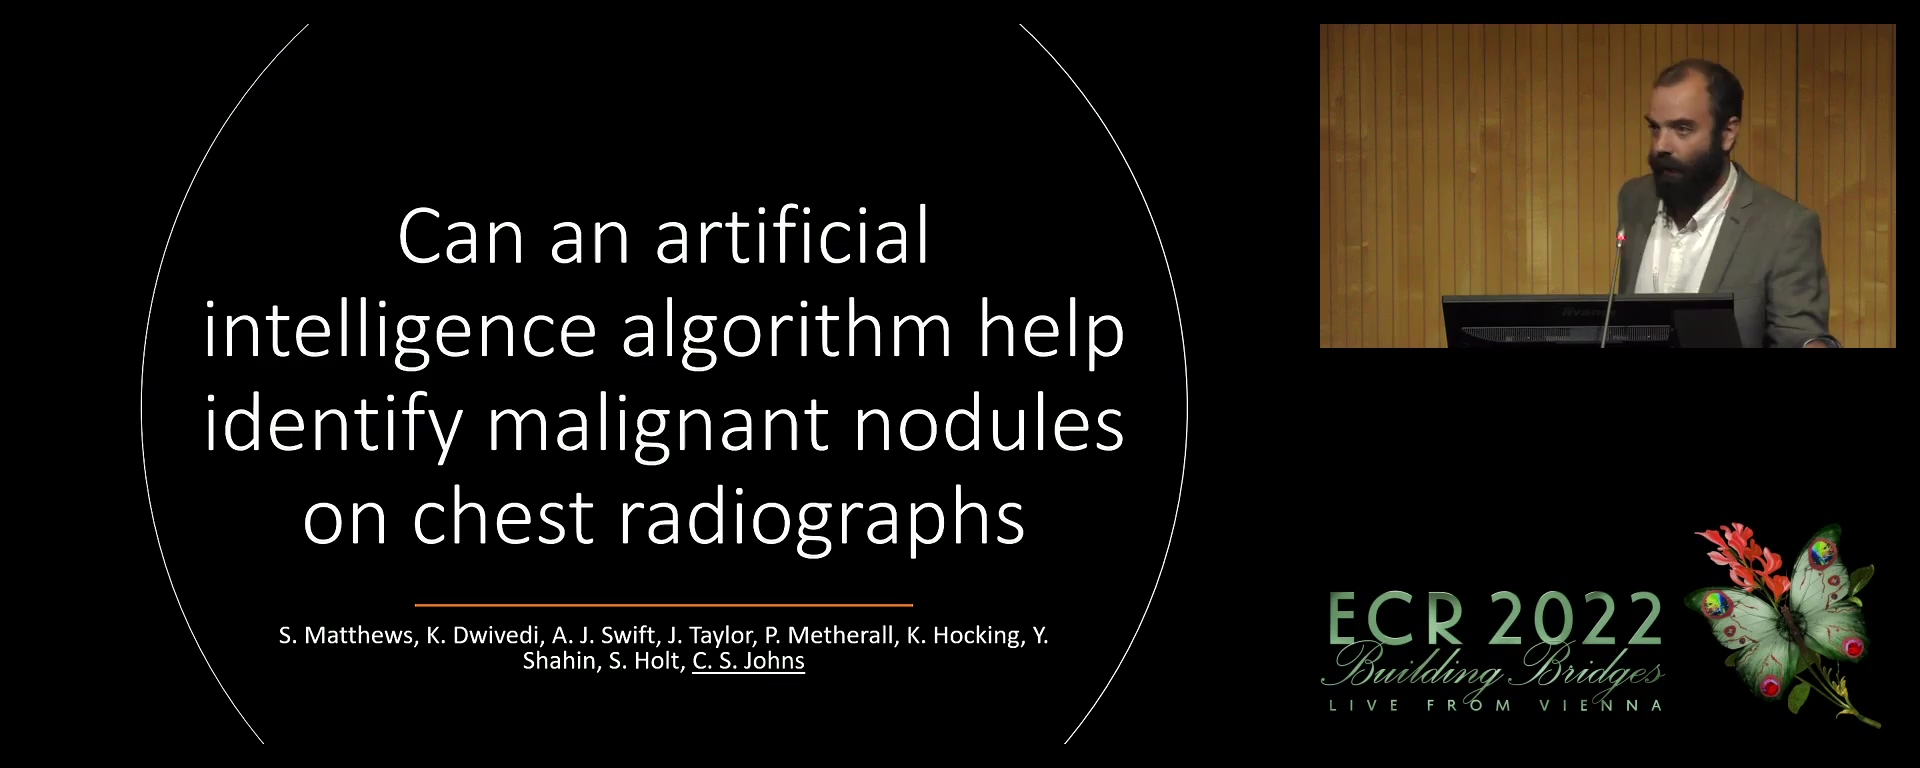 Can an artificial intelligence algorithm help identify malignant nodules on chest radiographs - Chris Johns, Sheffield / UK